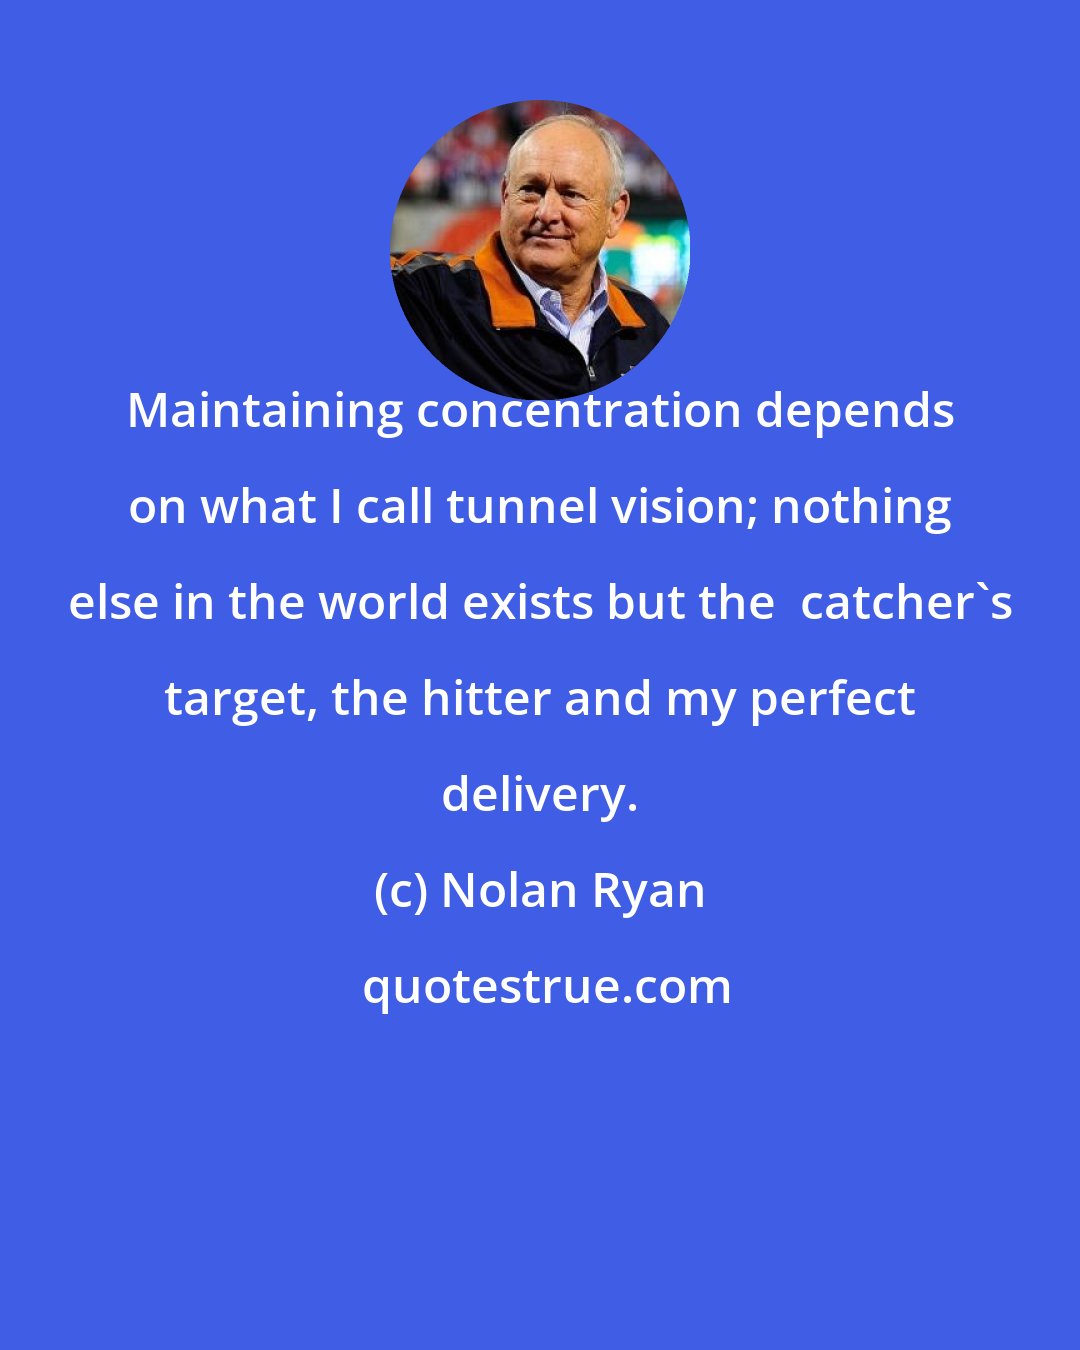 Nolan Ryan: Maintaining concentration depends on what I call tunnel vision; nothing else in the world exists but the  catcher's target, the hitter and my perfect delivery.